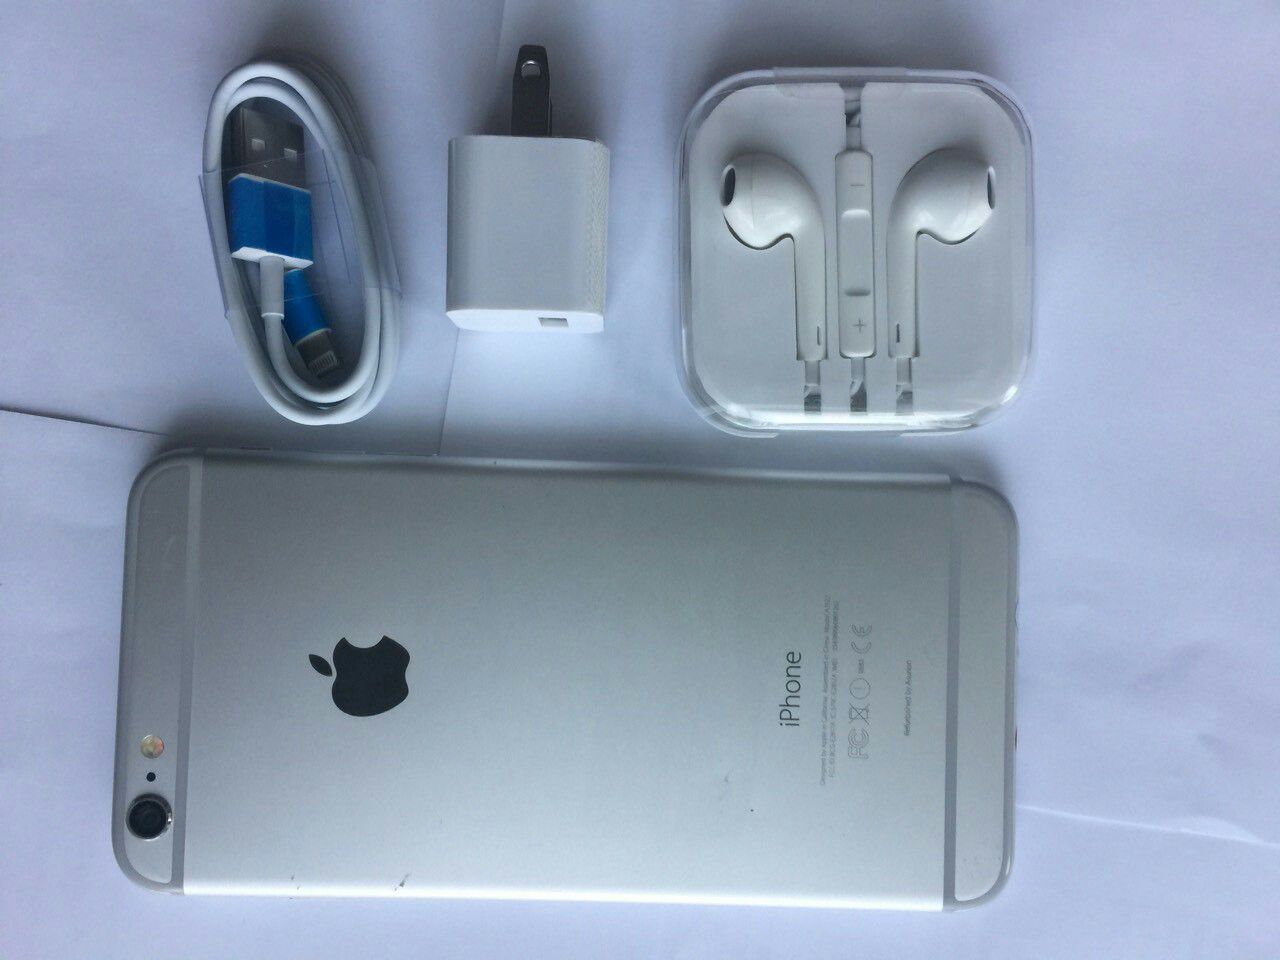 IPhone 6, 16GB, Unlocked, excellent condition